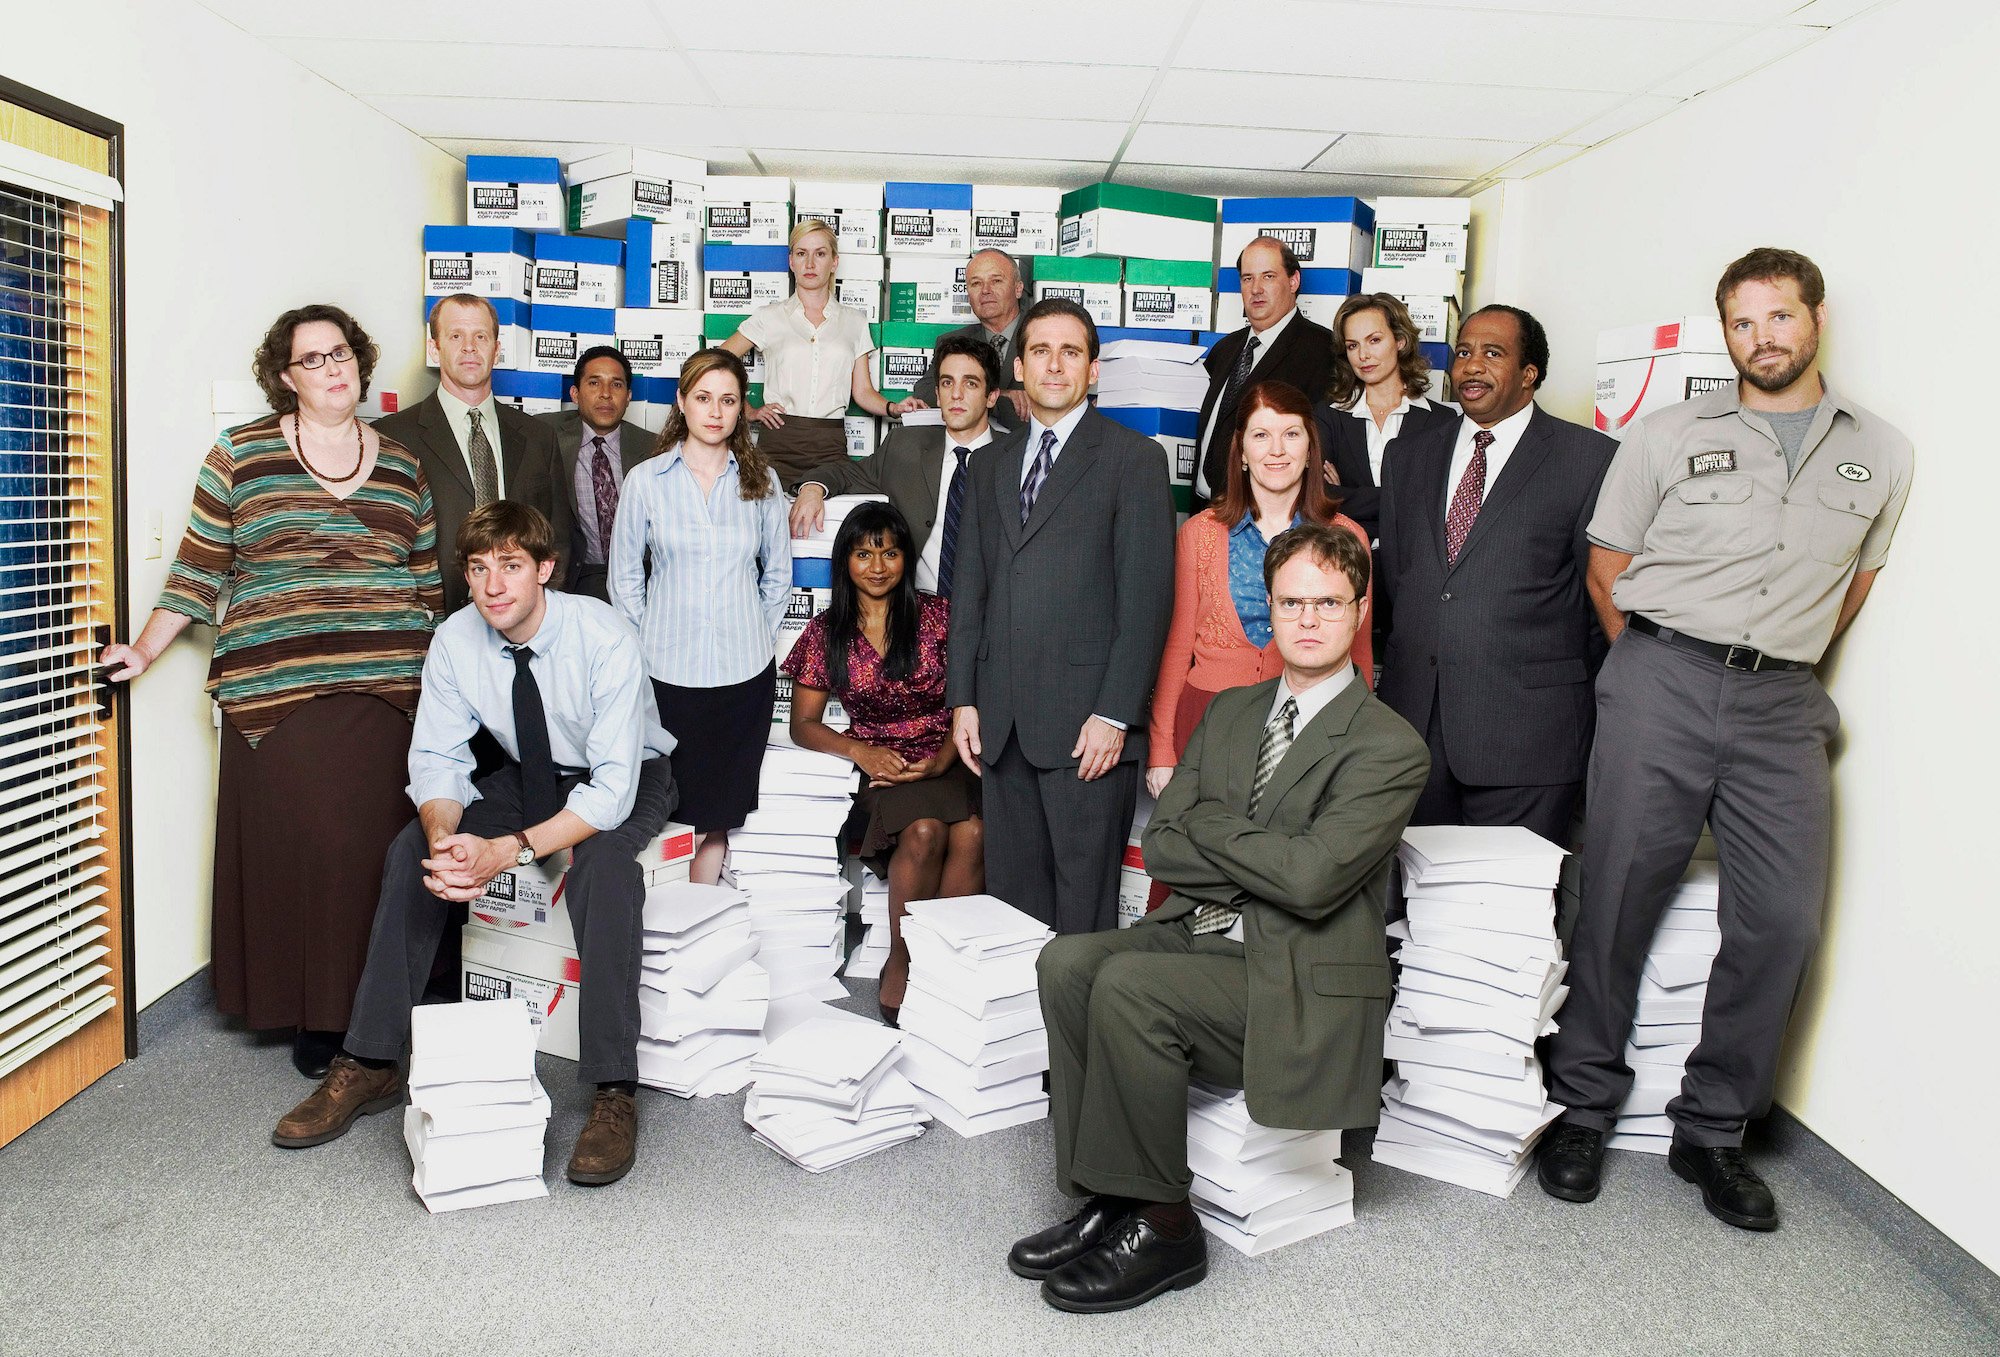 'The Office' cast members posing for a photo shoot.